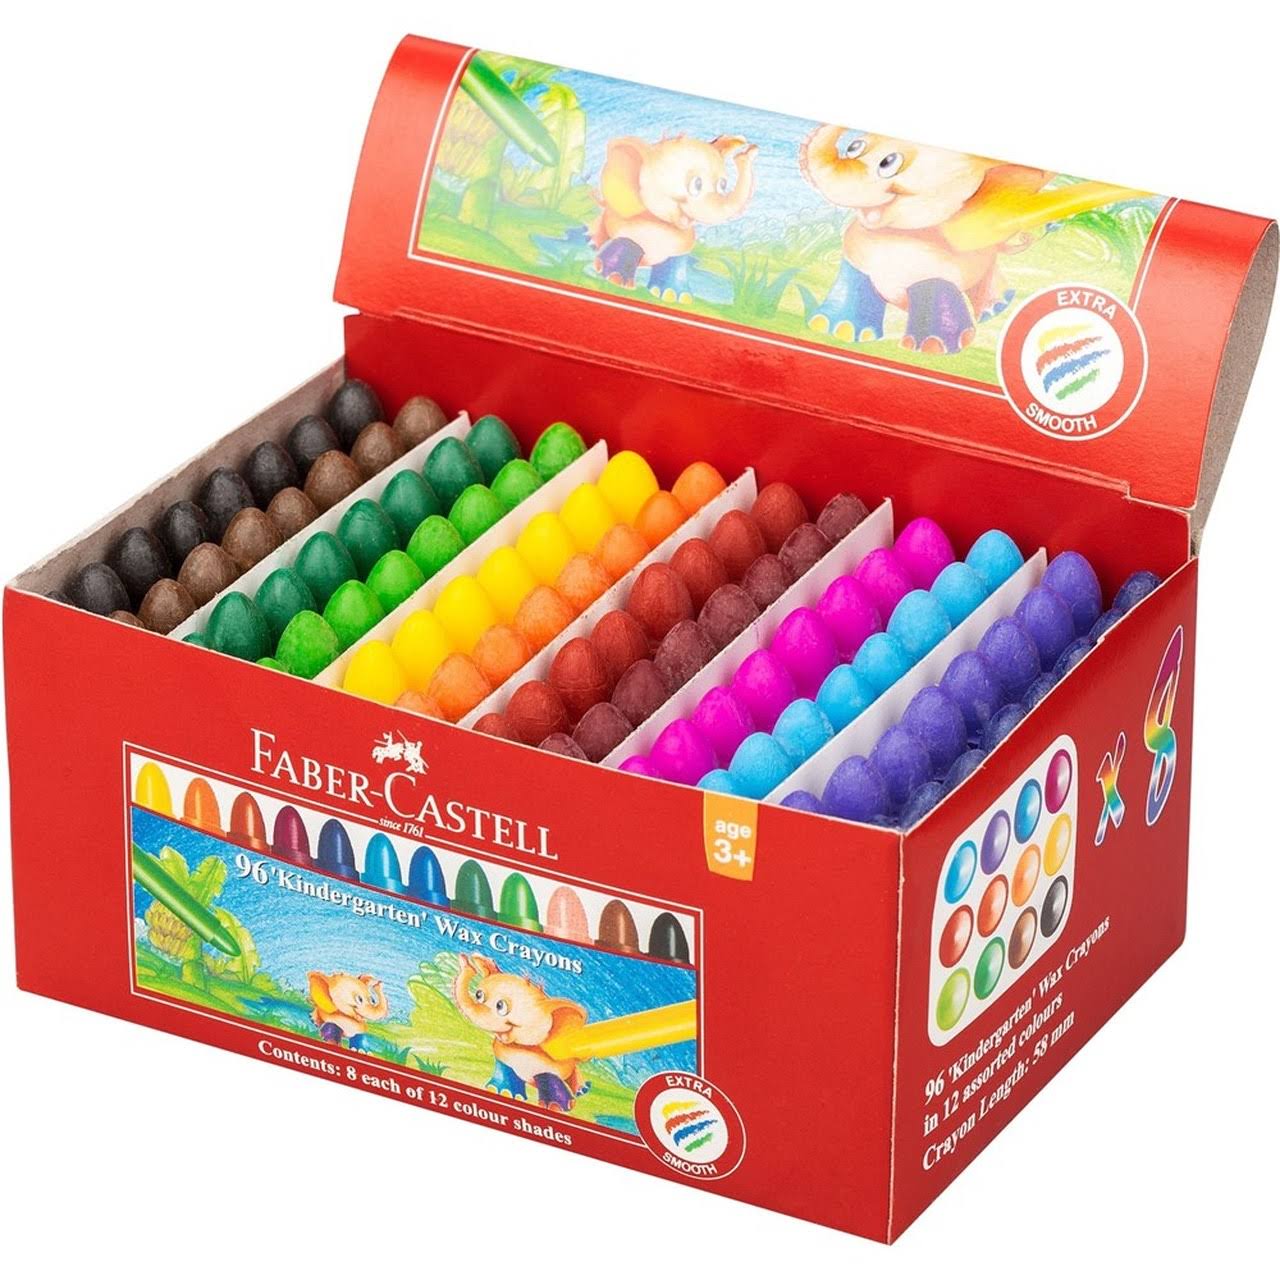 Faber-Castell Wax Crayons 96 Pack